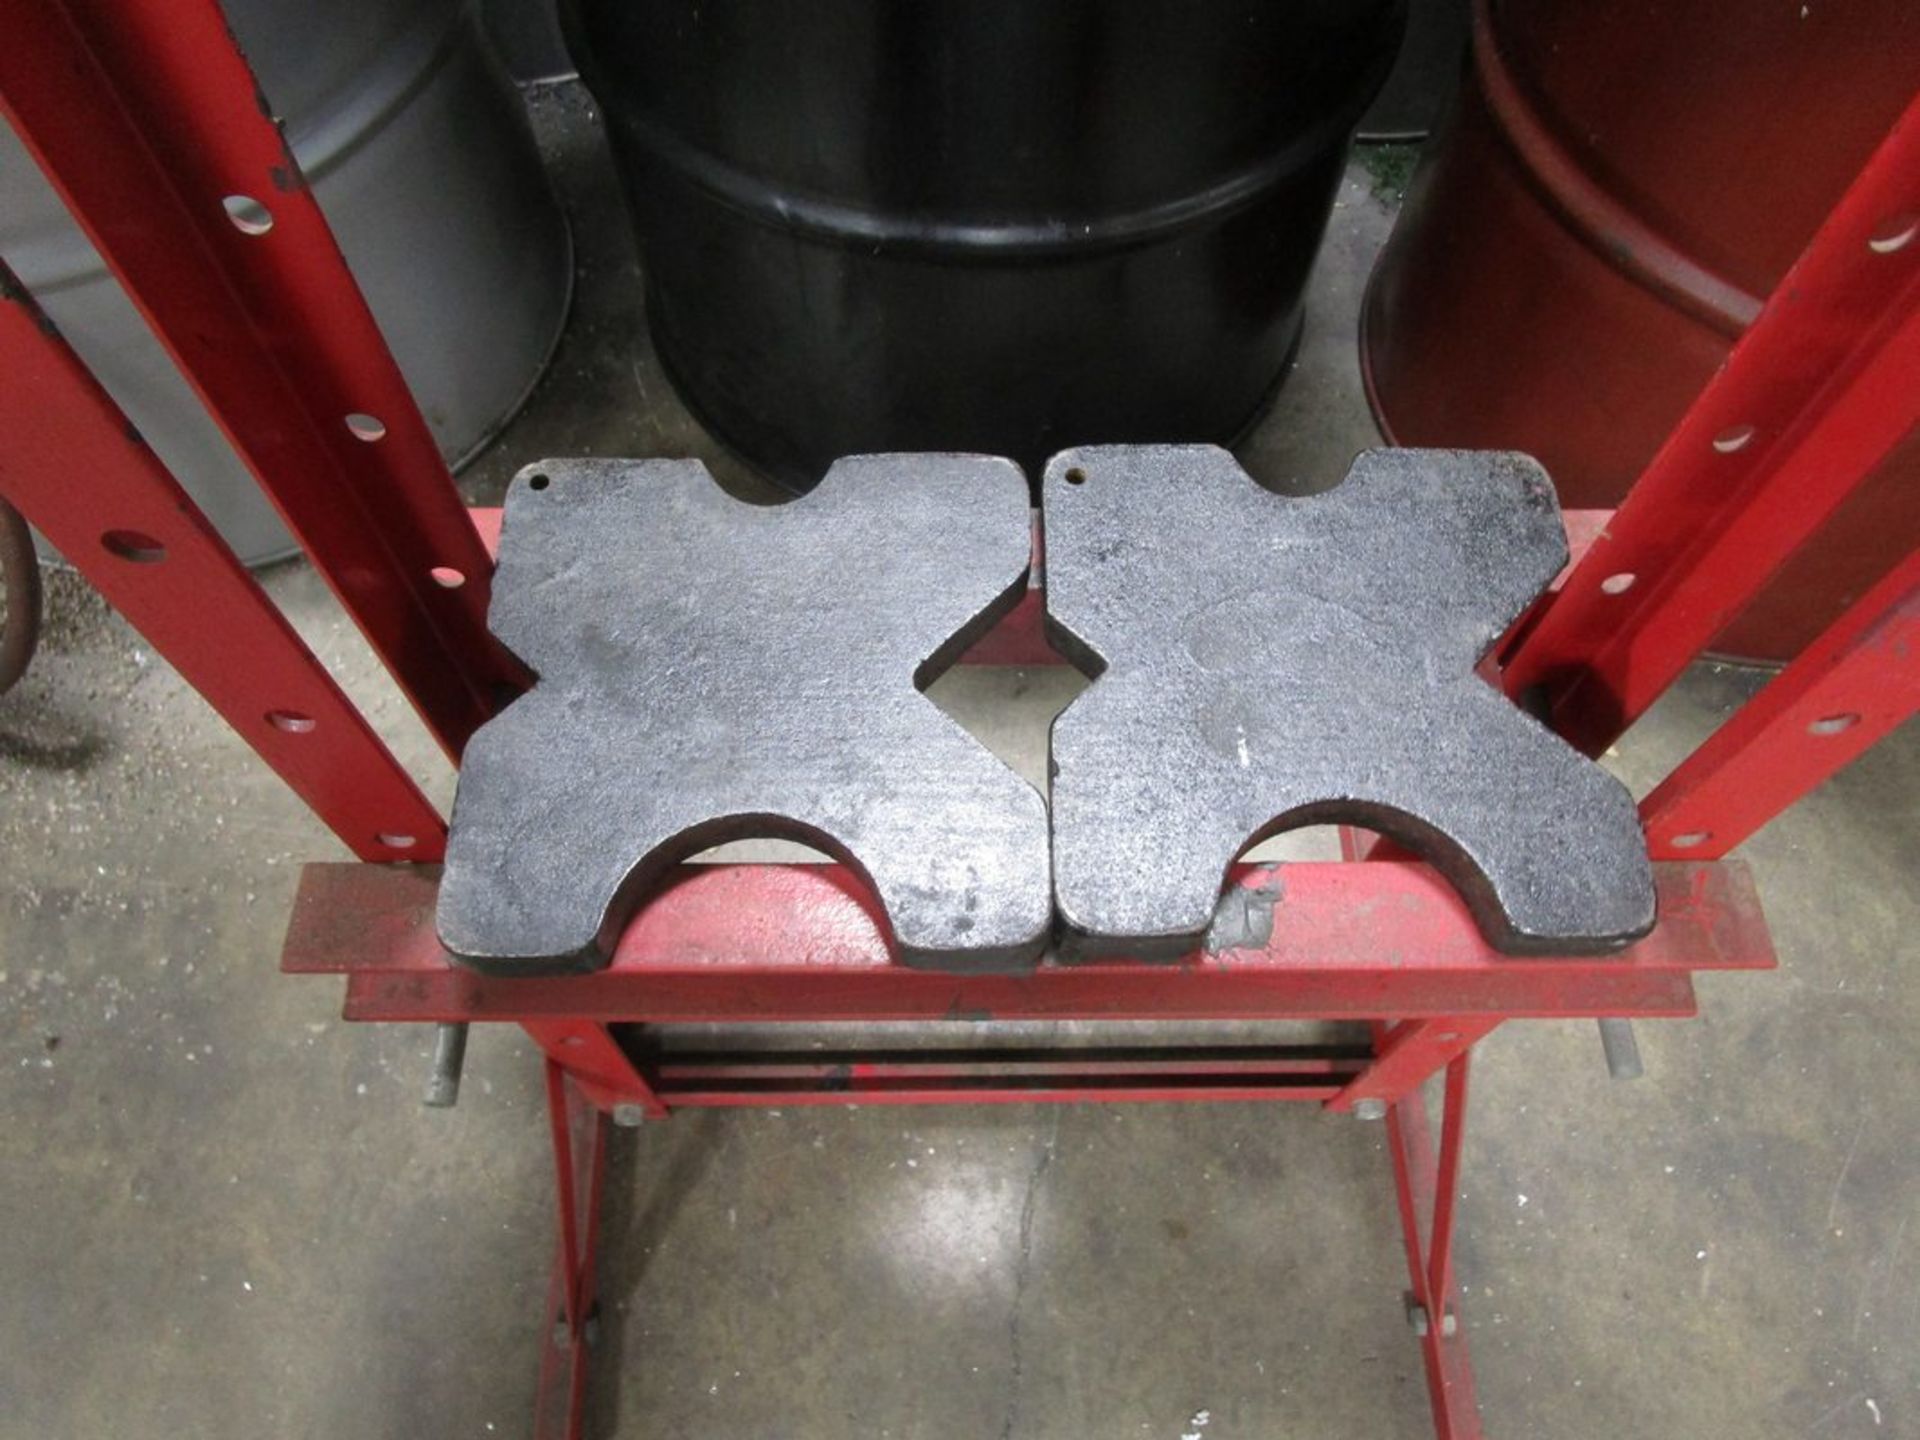 H-Frame Shop Press, 12-Ton, with Anvils - Image 3 of 3